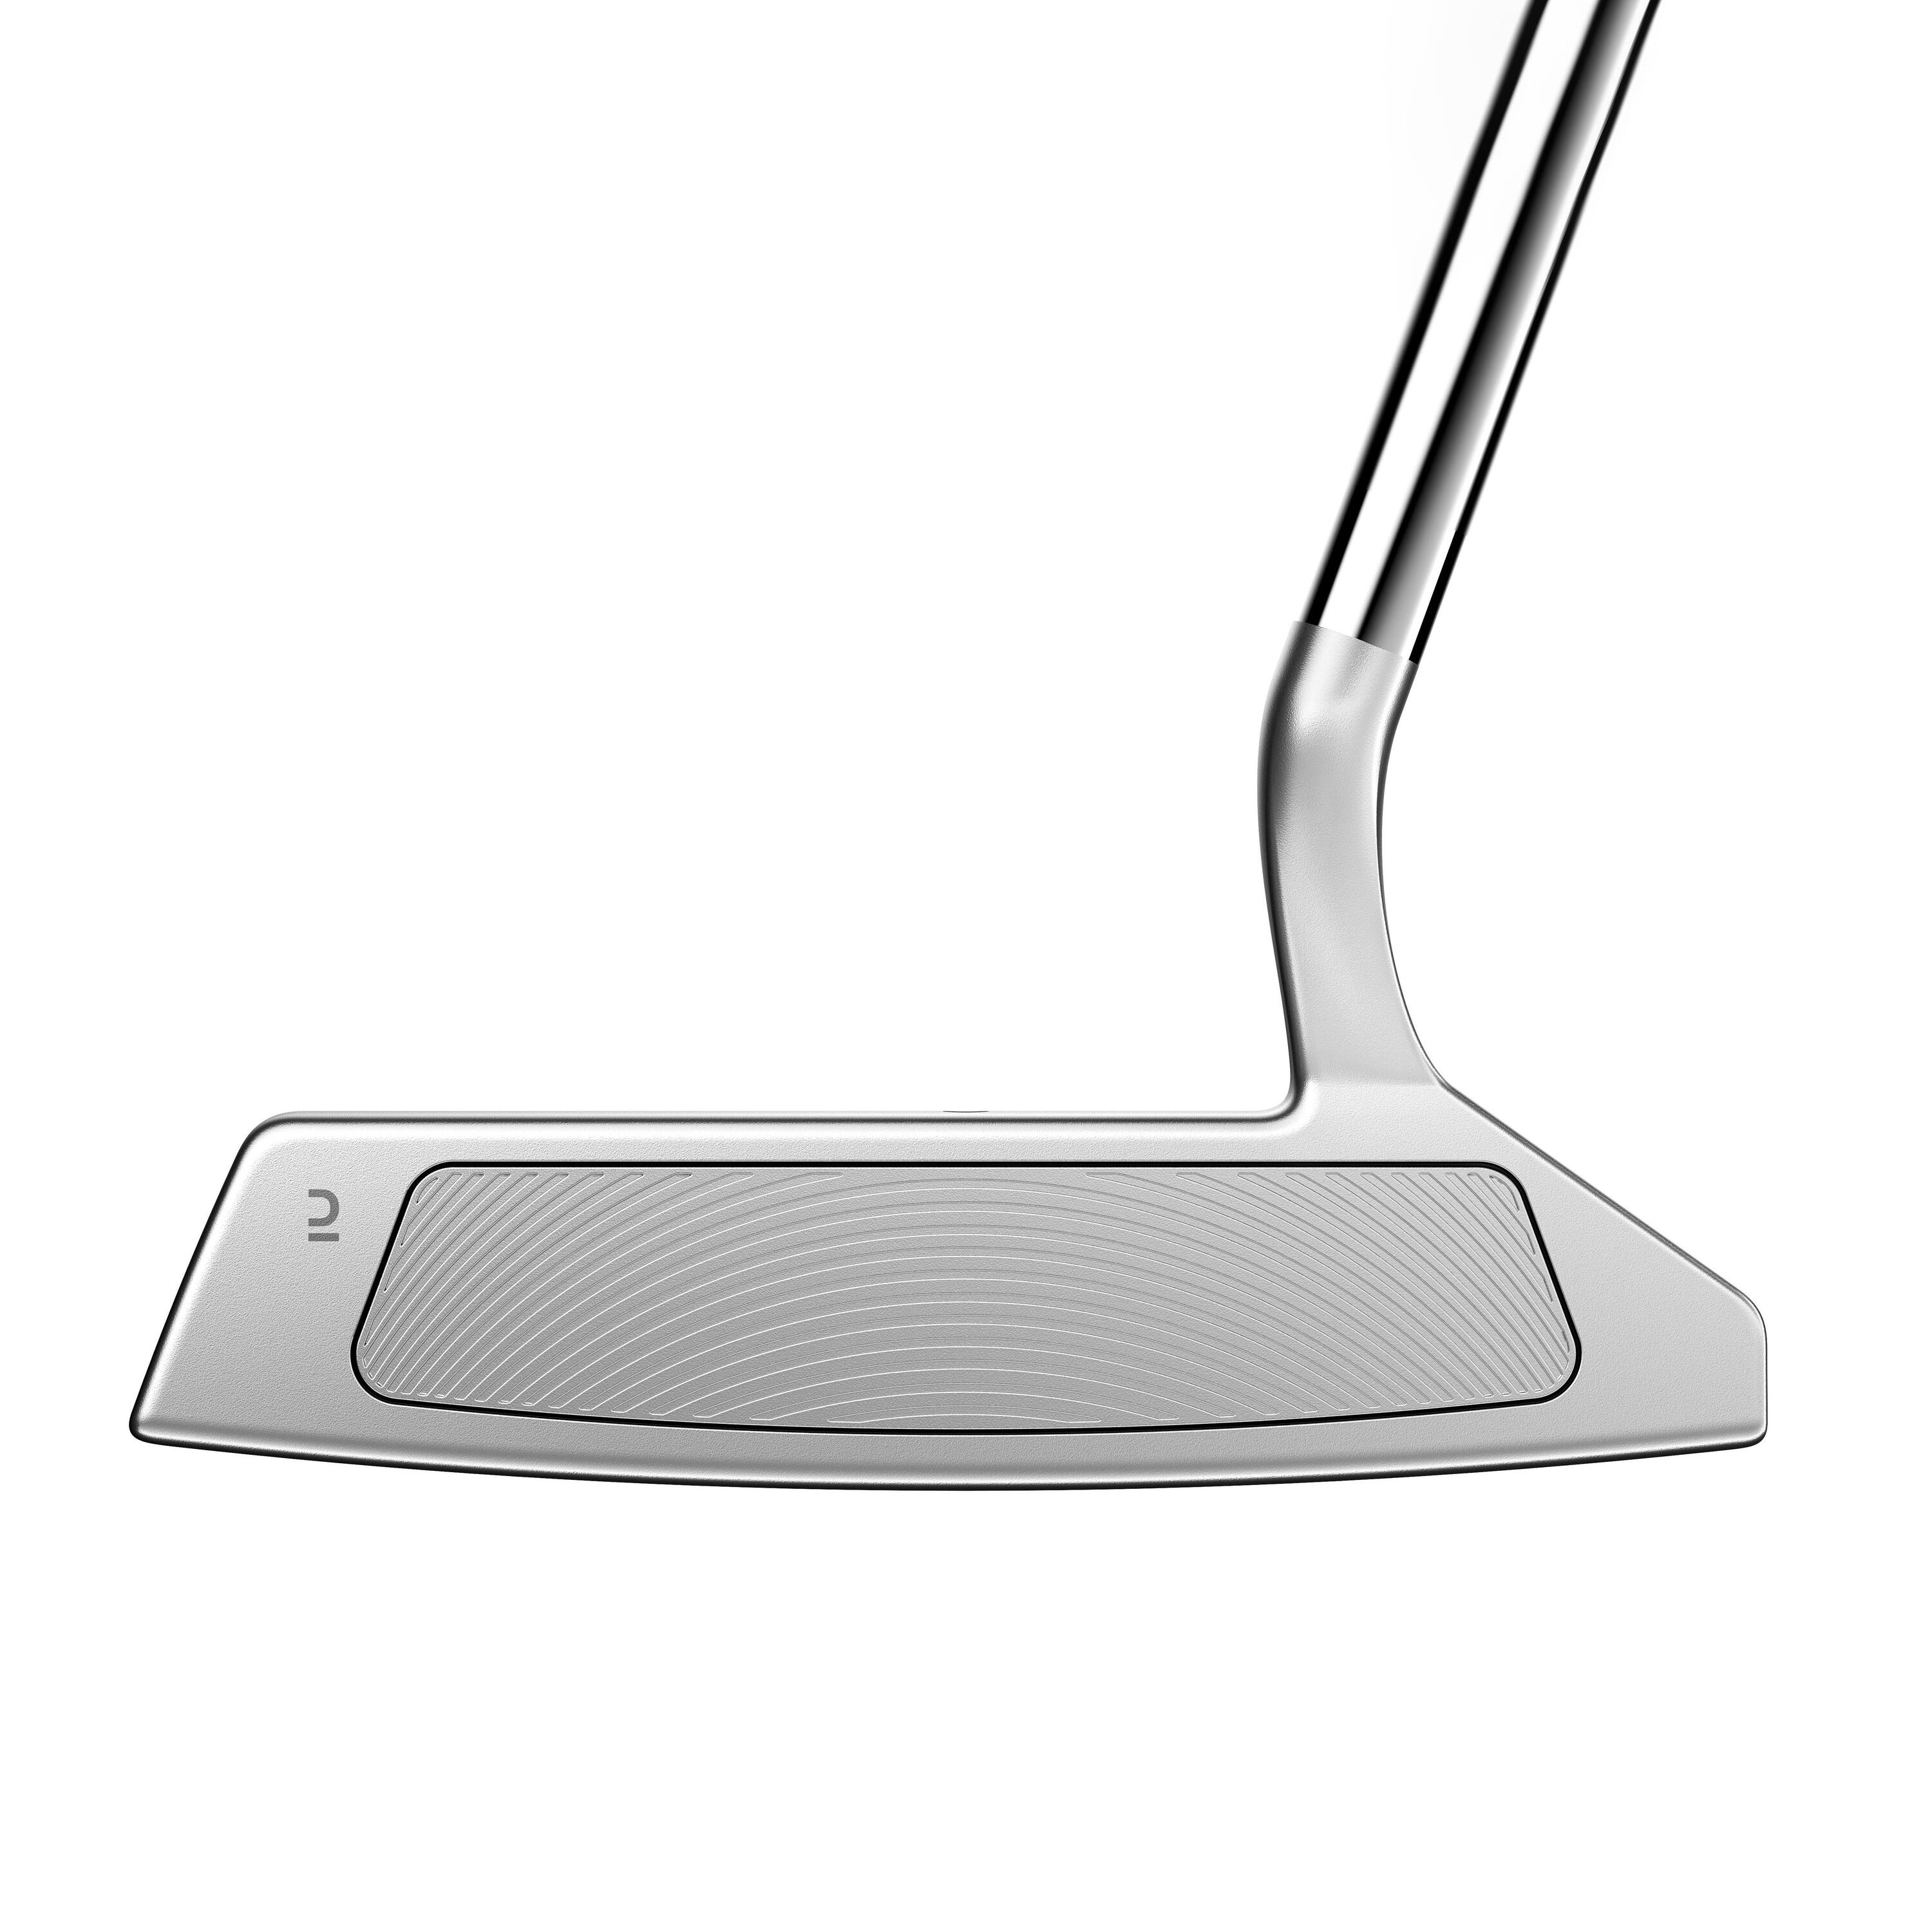 Toe hang golf putter right handed - INESIS blade 4/7